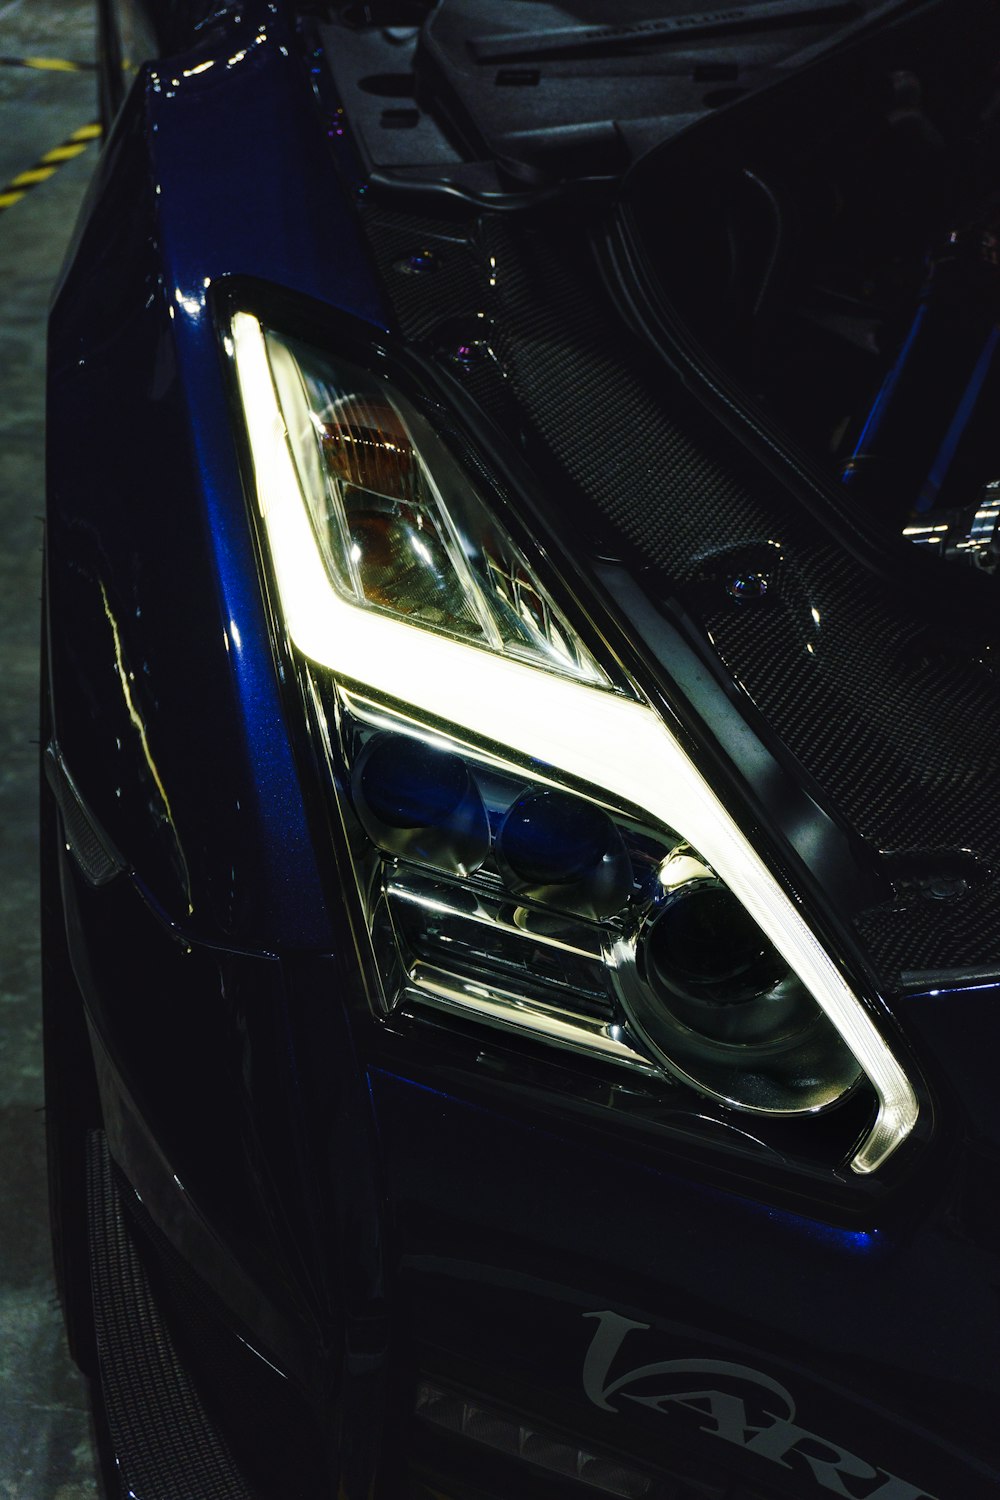 a close up of the headlight of a car